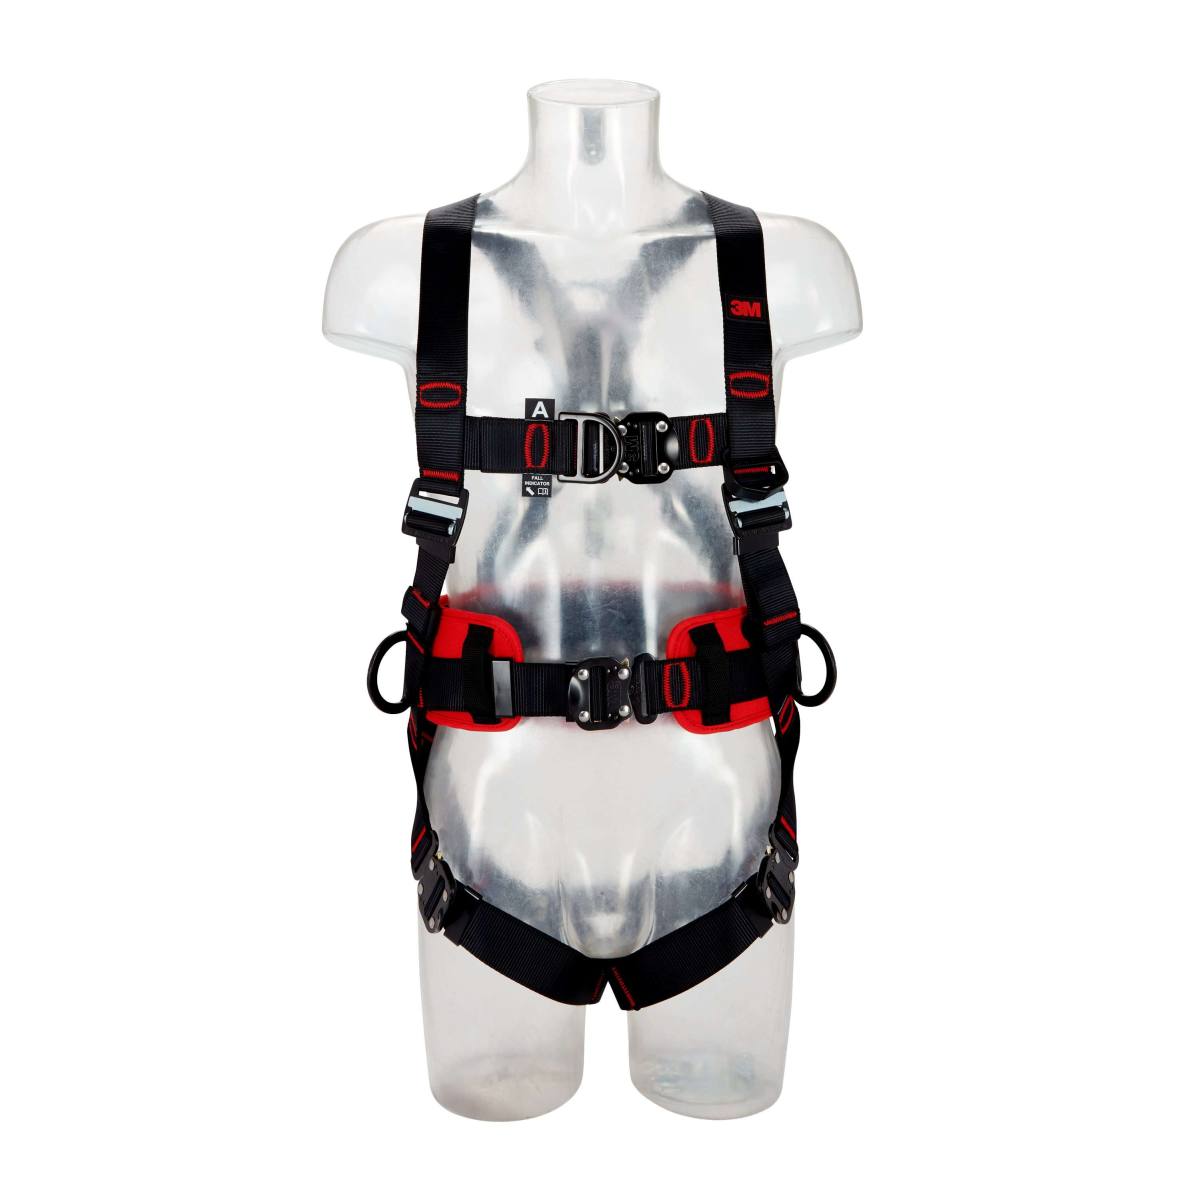 3M PROTECTA full body harness - chest and rear fall arrest eyelets, comfort harness with side attachment points, automatic buckles, chest and rear fall indicators, belt end depot, label protection with labeling field, black coated, XL